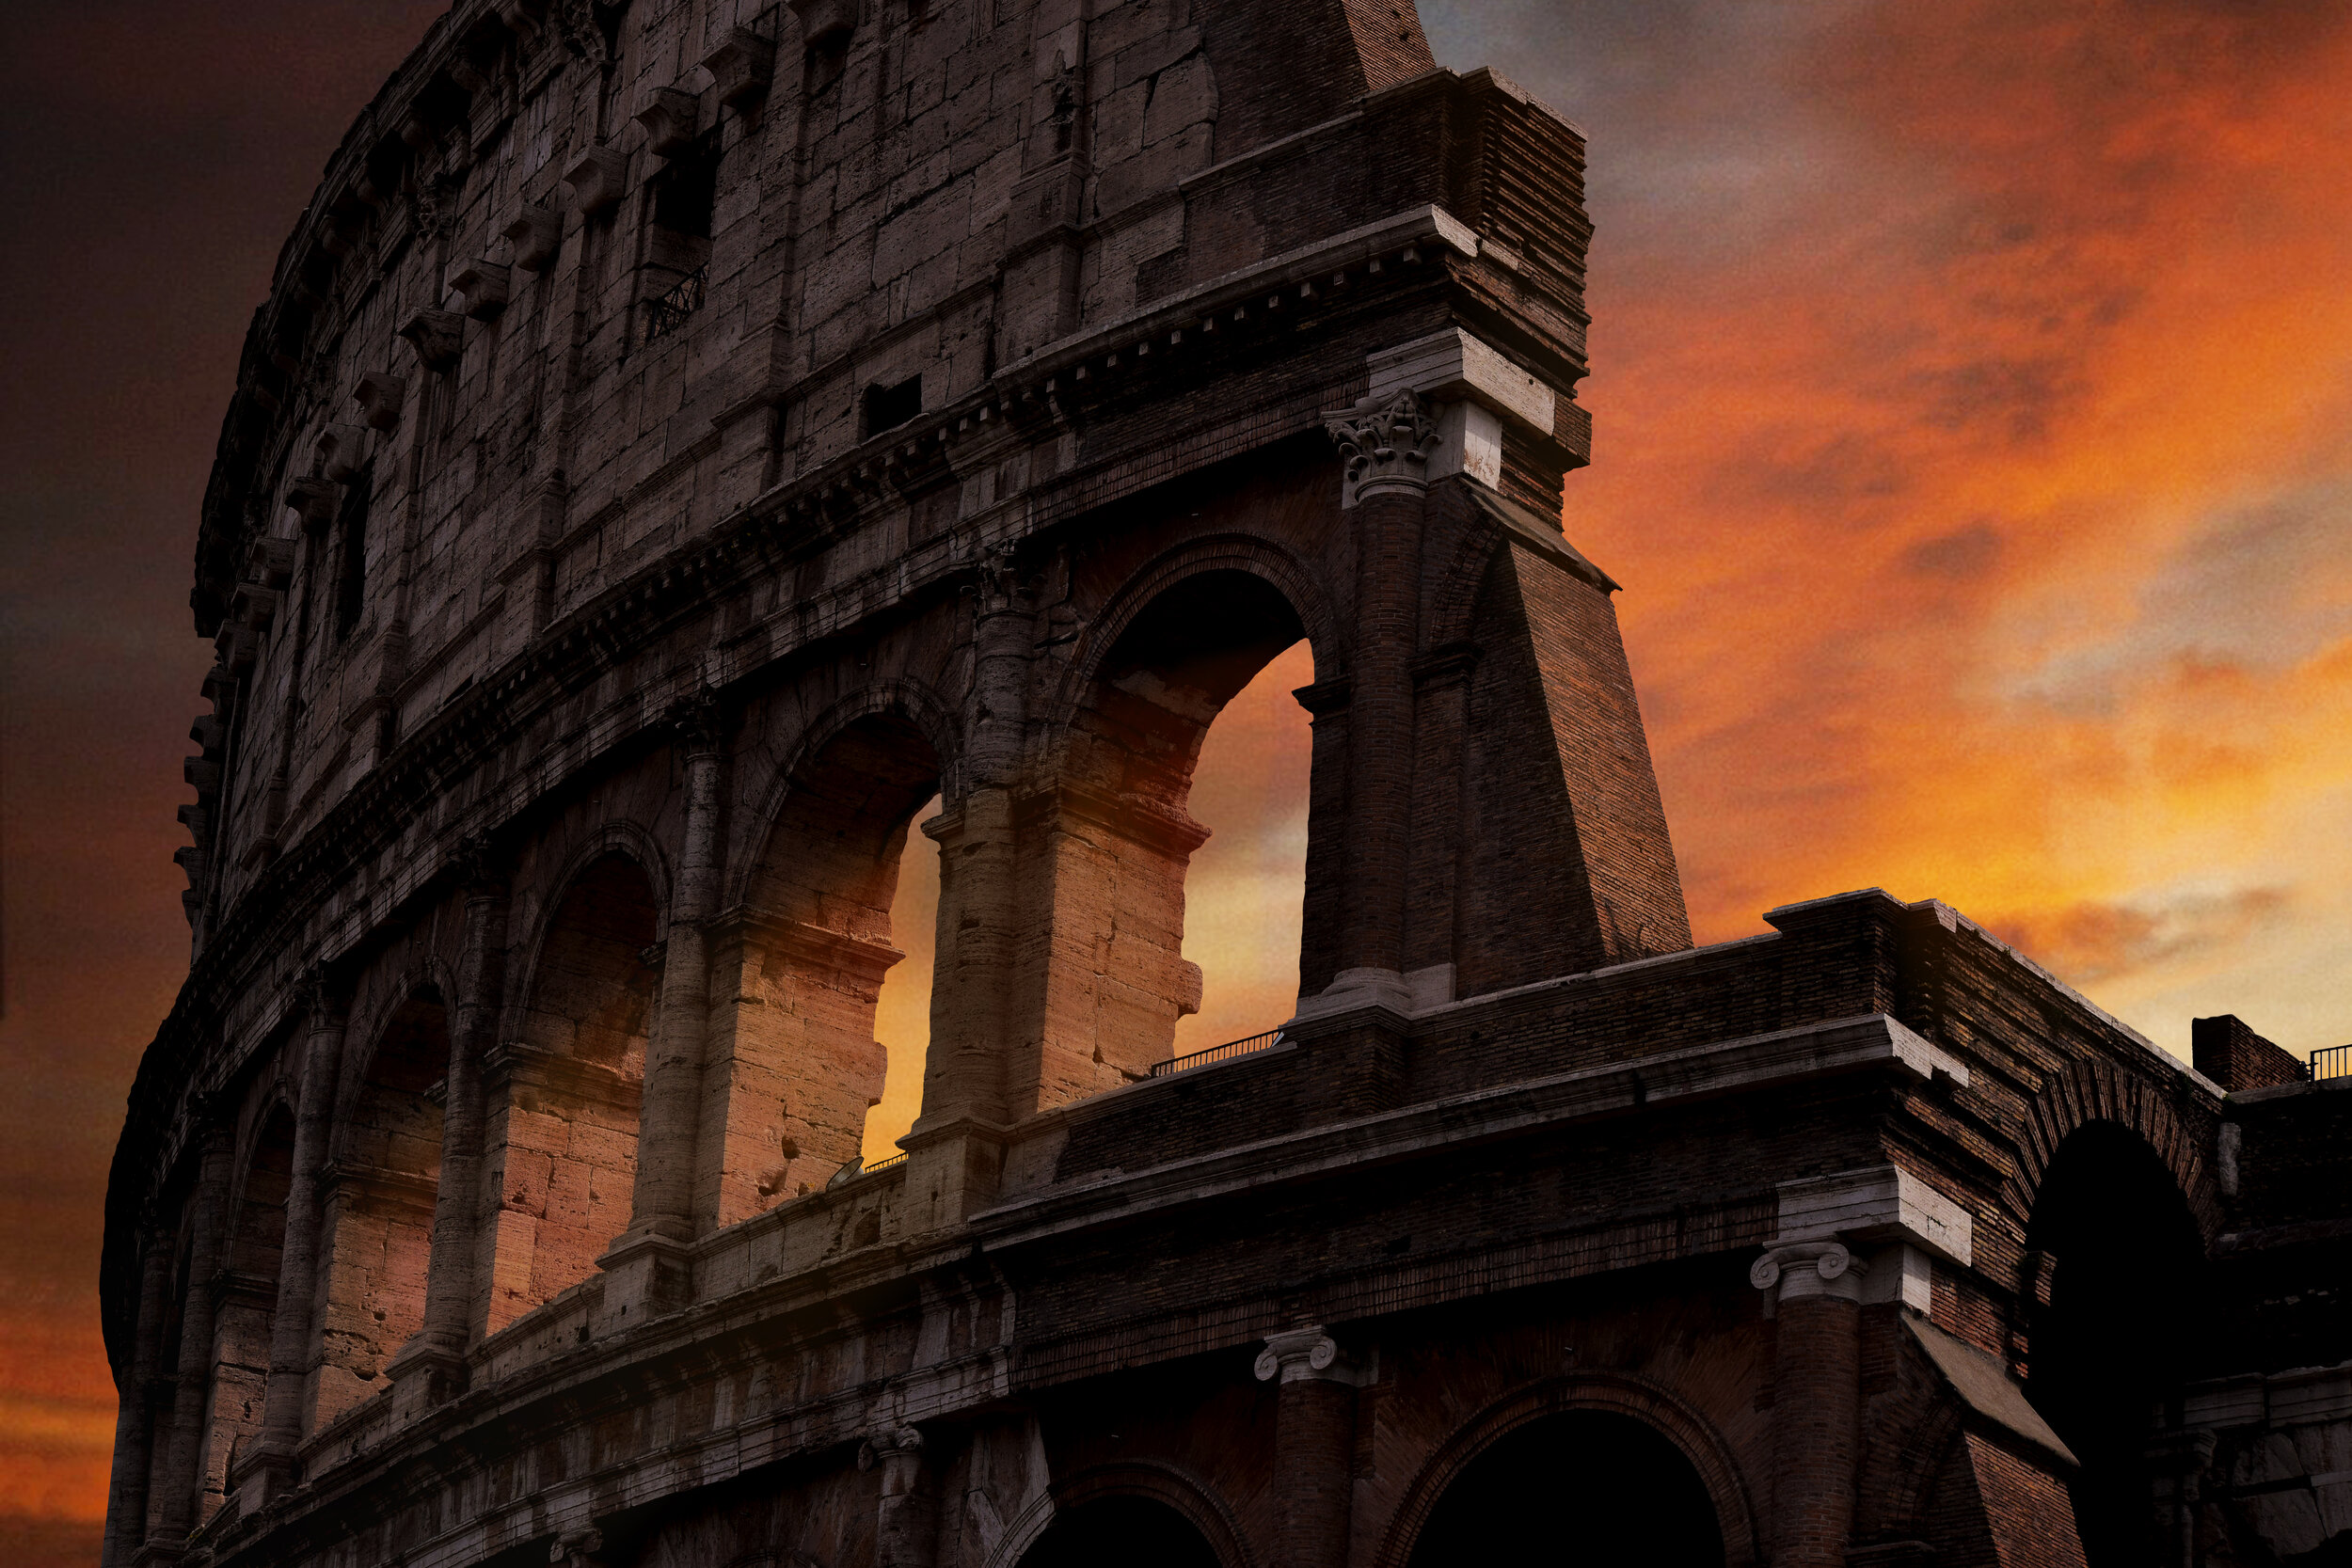  Experience the Colosseum by night - take an evening tour to view this amazing historical place in a new light 